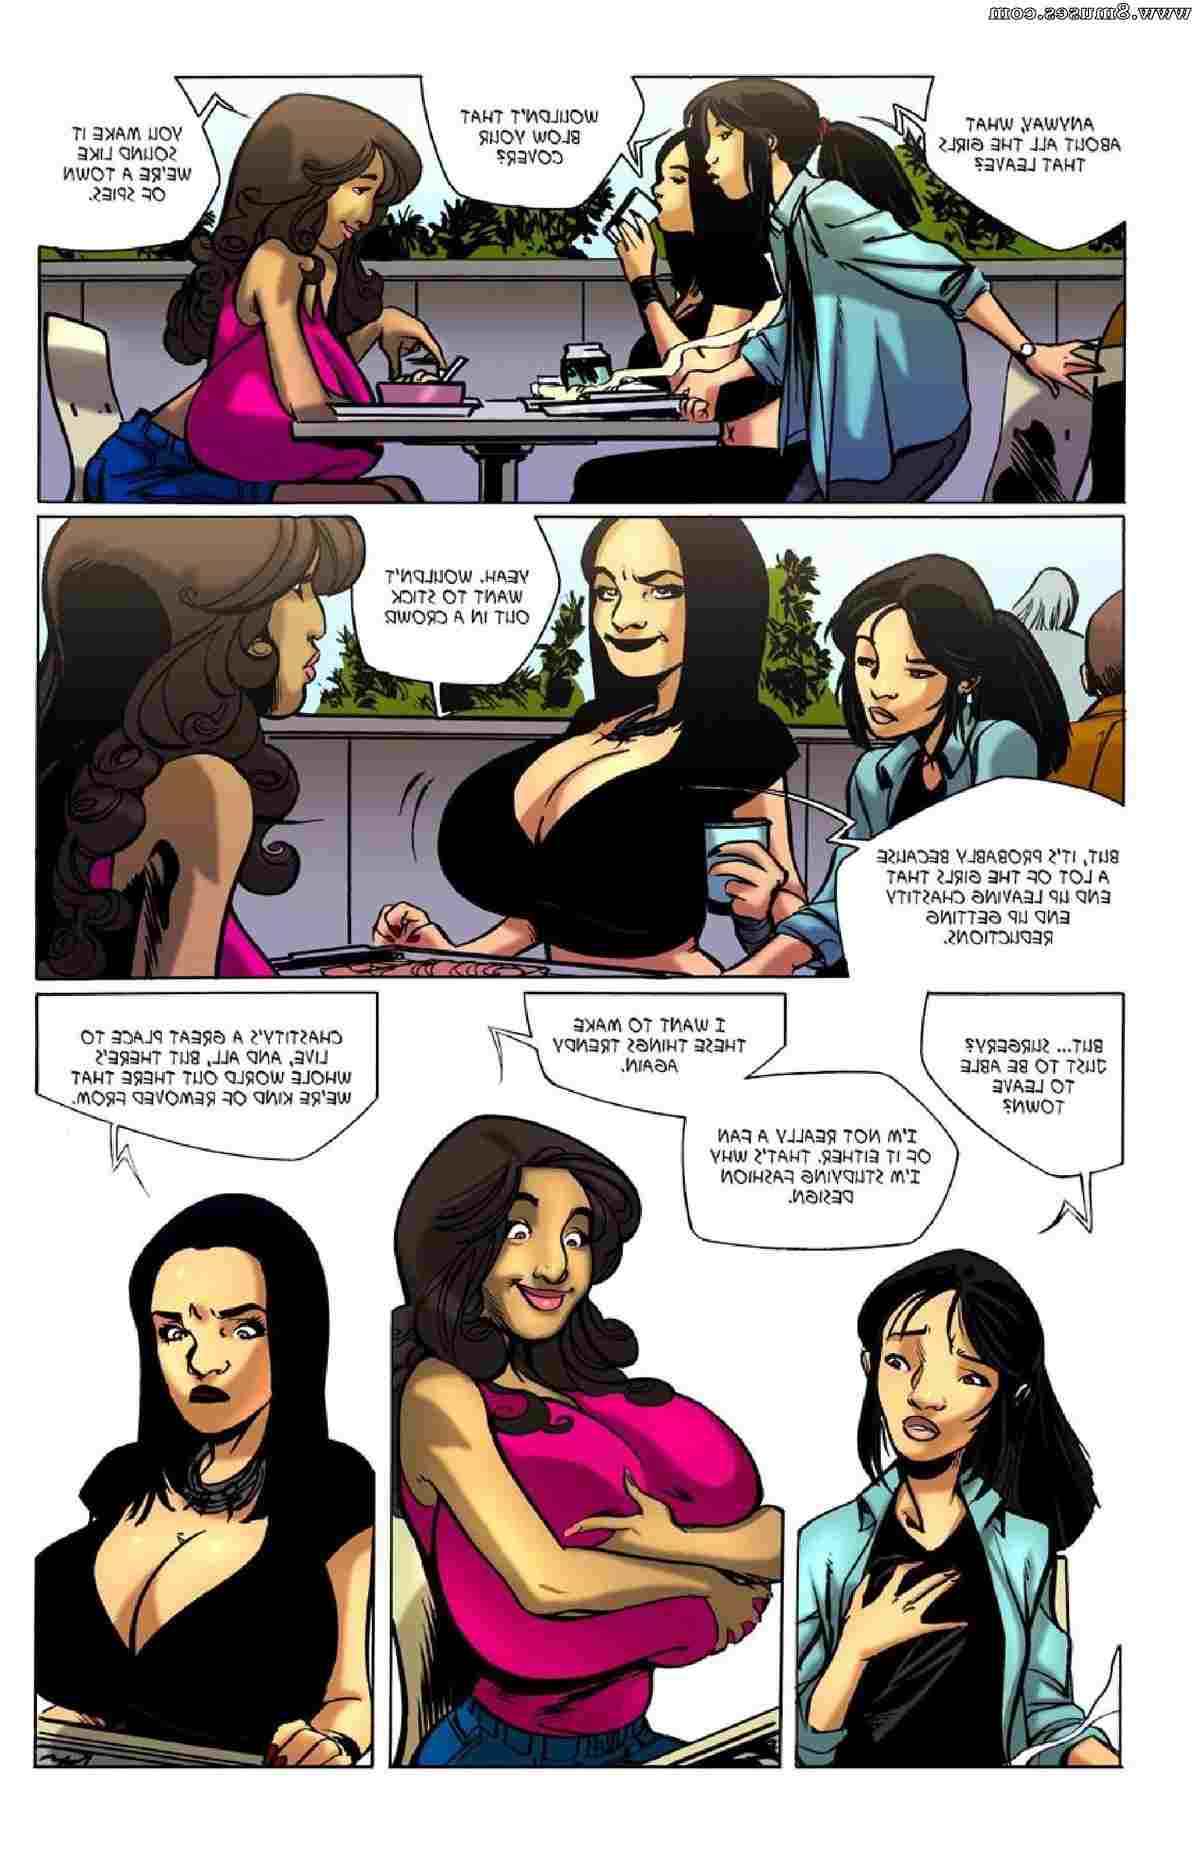 BE-Story-Club-Comics/Welcome-to-Chastity Welcome_to_Chastity__8muses_-_Sex_and_Porn_Comics_17.jpg